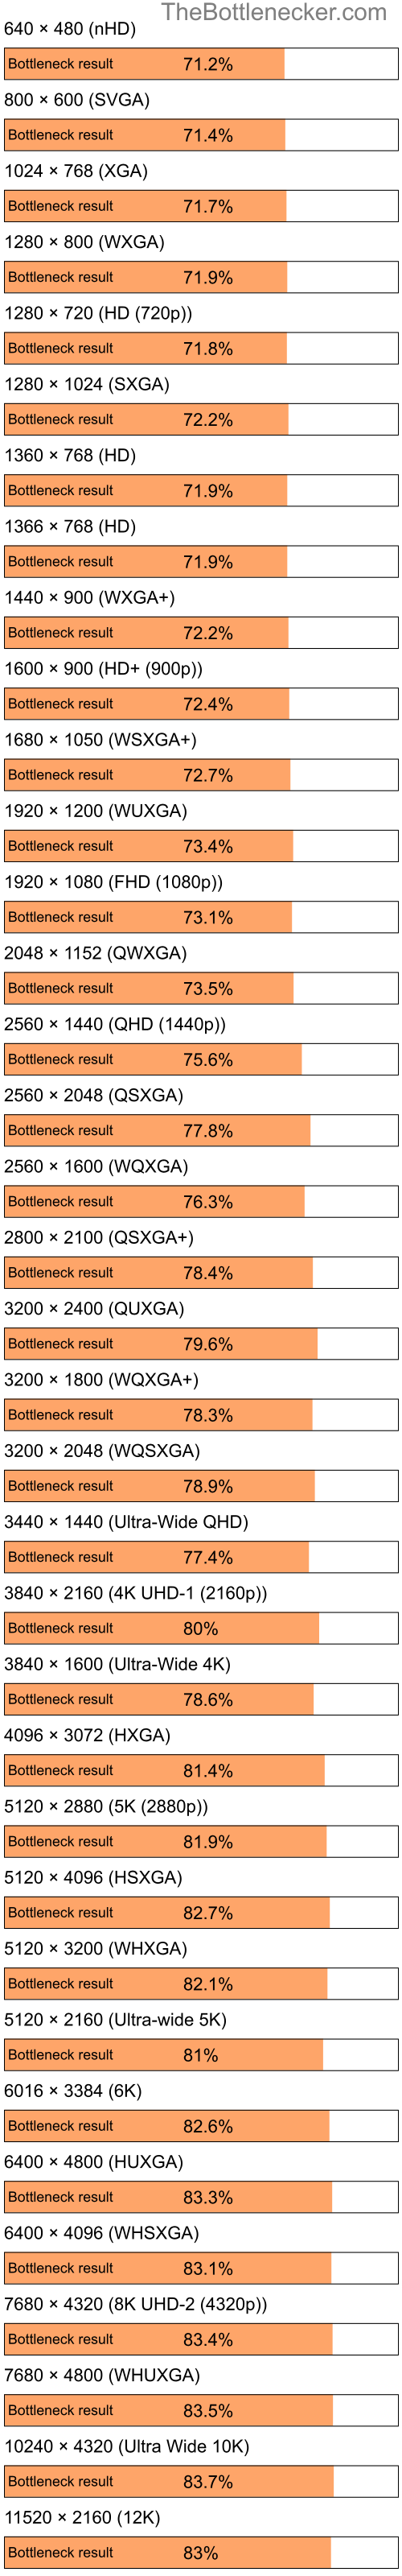 Bottleneck results by resolution for Intel Celeron and NVIDIA GeForce 9300 GE in Graphic Card Intense Tasks